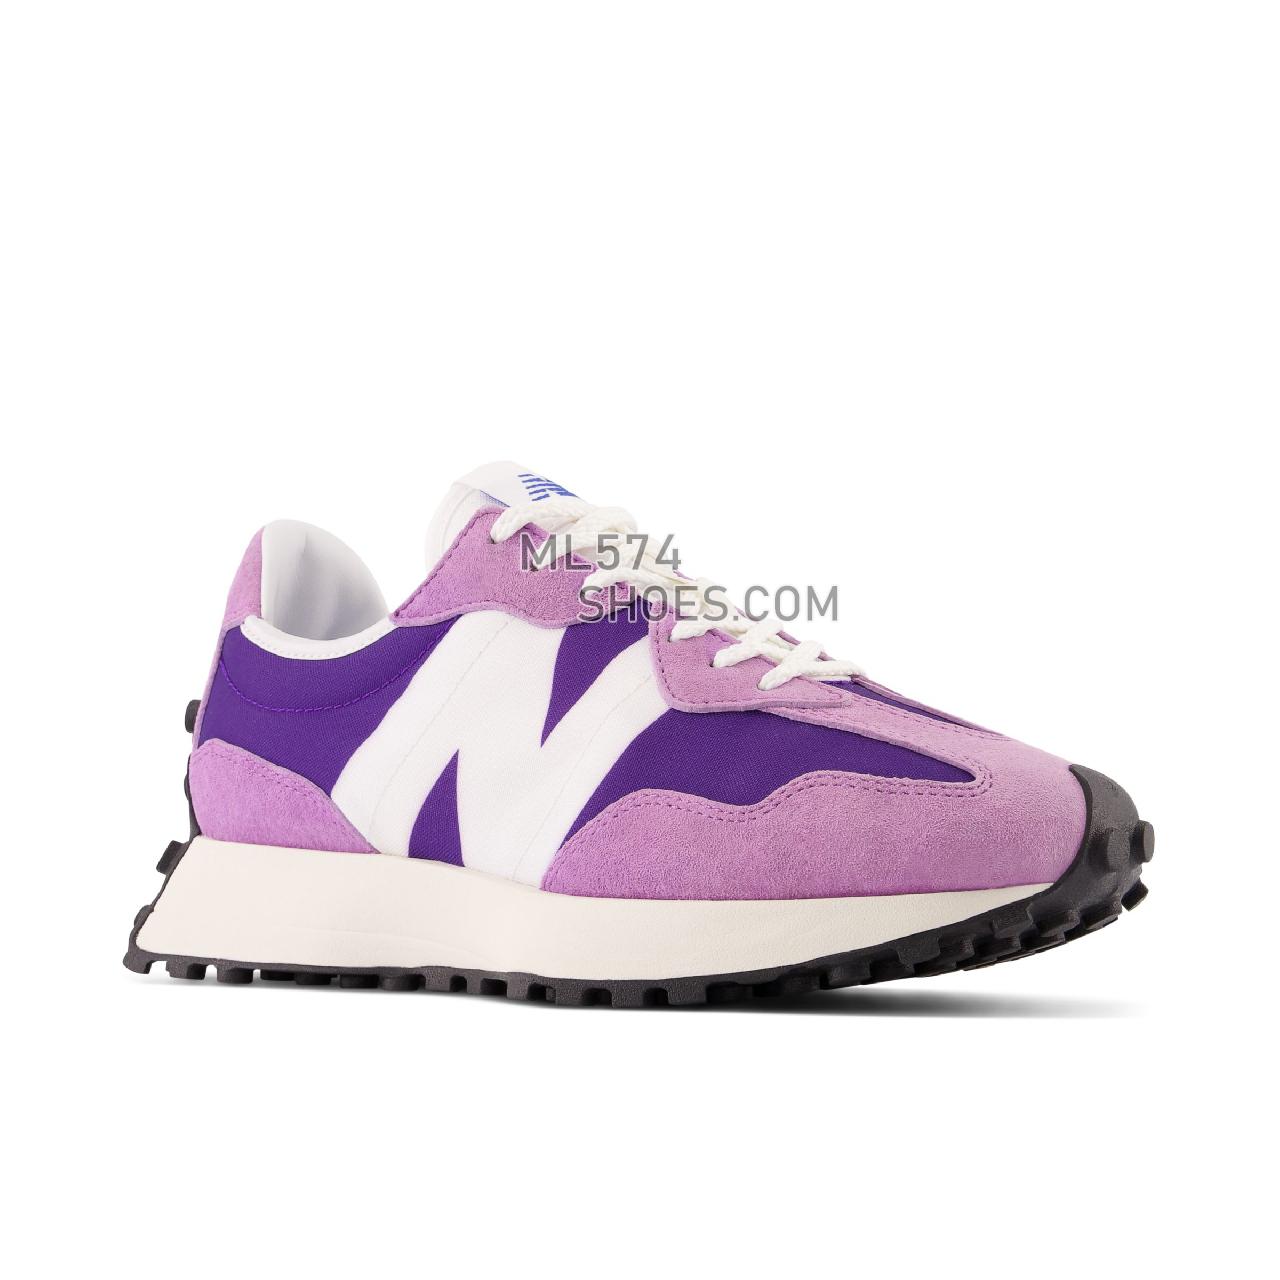 New Balance 327 - Women's Sport Style Sneakers - Deep Violet with Heliotrope - WS327LK1